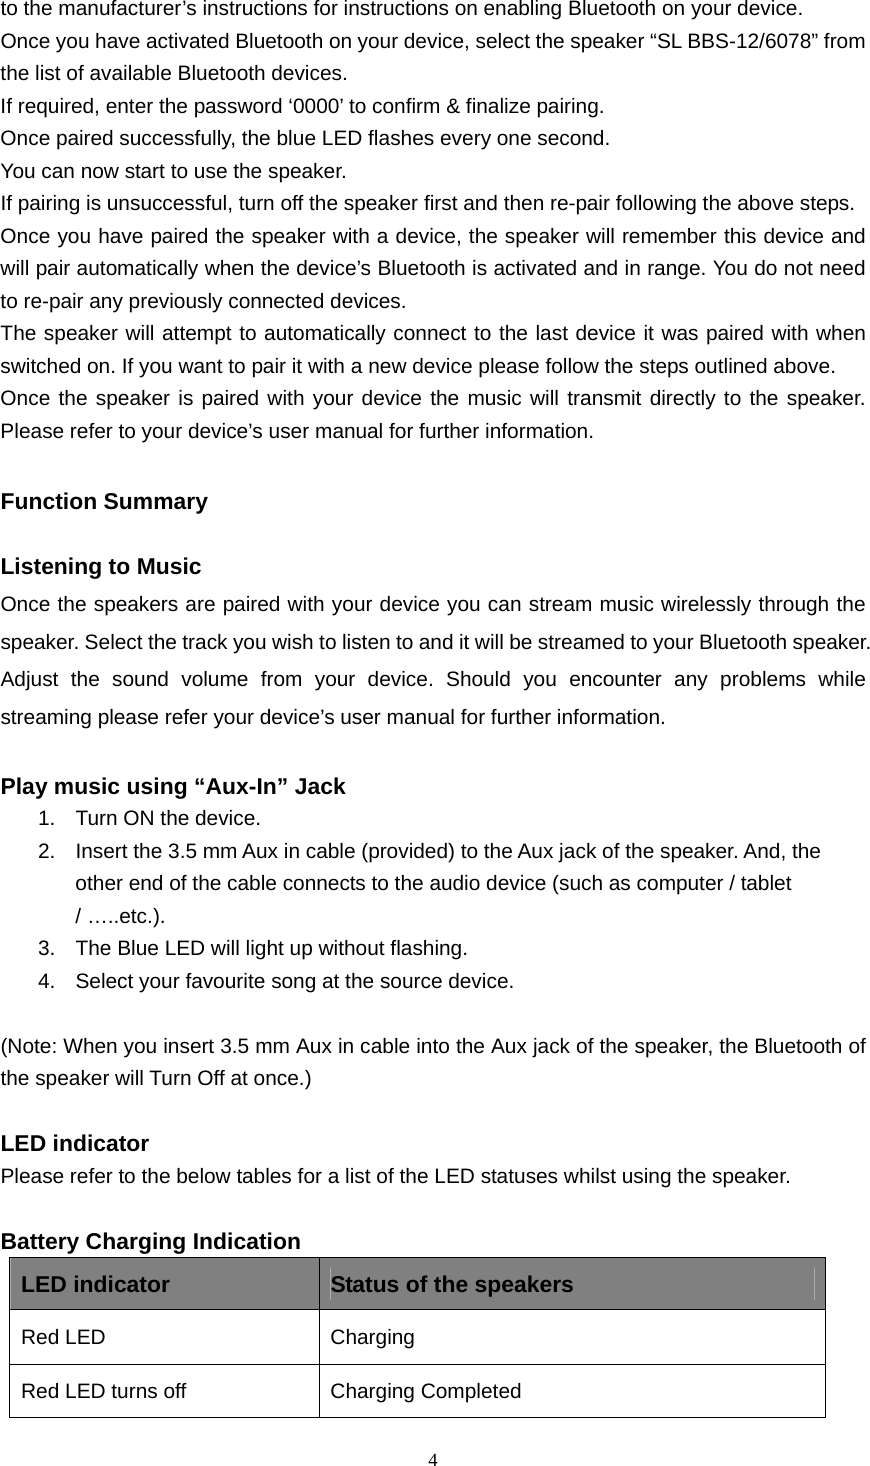  4  to the manufacturer’s instructions for instructions on enabling Bluetooth on your device. Once you have activated Bluetooth on your device, select the speaker “SL BBS-12/6078” from the list of available Bluetooth devices. If required, enter the password ‘0000’ to confirm &amp; finalize pairing. Once paired successfully, the blue LED flashes every one second. You can now start to use the speaker. If pairing is unsuccessful, turn off the speaker first and then re-pair following the above steps. Once you have paired the speaker with a device, the speaker will remember this device and will pair automatically when the device’s Bluetooth is activated and in range. You do not need to re-pair any previously connected devices. The speaker will attempt to automatically connect to the last device it was paired with when switched on. If you want to pair it with a new device please follow the steps outlined above. Once the speaker is paired with your device the music will transmit directly to the speaker. Please refer to your device’s user manual for further information.  Function Summary    Listening to Music Once the speakers are paired with your device you can stream music wirelessly through the speaker. Select the track you wish to listen to and it will be streamed to your Bluetooth speaker. Adjust the sound volume from your device. Should you encounter any problems while streaming please refer your device’s user manual for further information.  Play music using “Aux-In” Jack 1.  Turn ON the device. 2.  Insert the 3.5 mm Aux in cable (provided) to the Aux jack of the speaker. And, the other end of the cable connects to the audio device (such as computer / tablet / …..etc.). 3.  The Blue LED will light up without flashing. 4.  Select your favourite song at the source device.  (Note: When you insert 3.5 mm Aux in cable into the Aux jack of the speaker, the Bluetooth of the speaker will Turn Off at once.)  LED indicator Please refer to the below tables for a list of the LED statuses whilst using the speaker.  Battery Charging Indication LED indicator  Status of the speakers Red LED   Charging  Red LED turns off  Charging Completed 